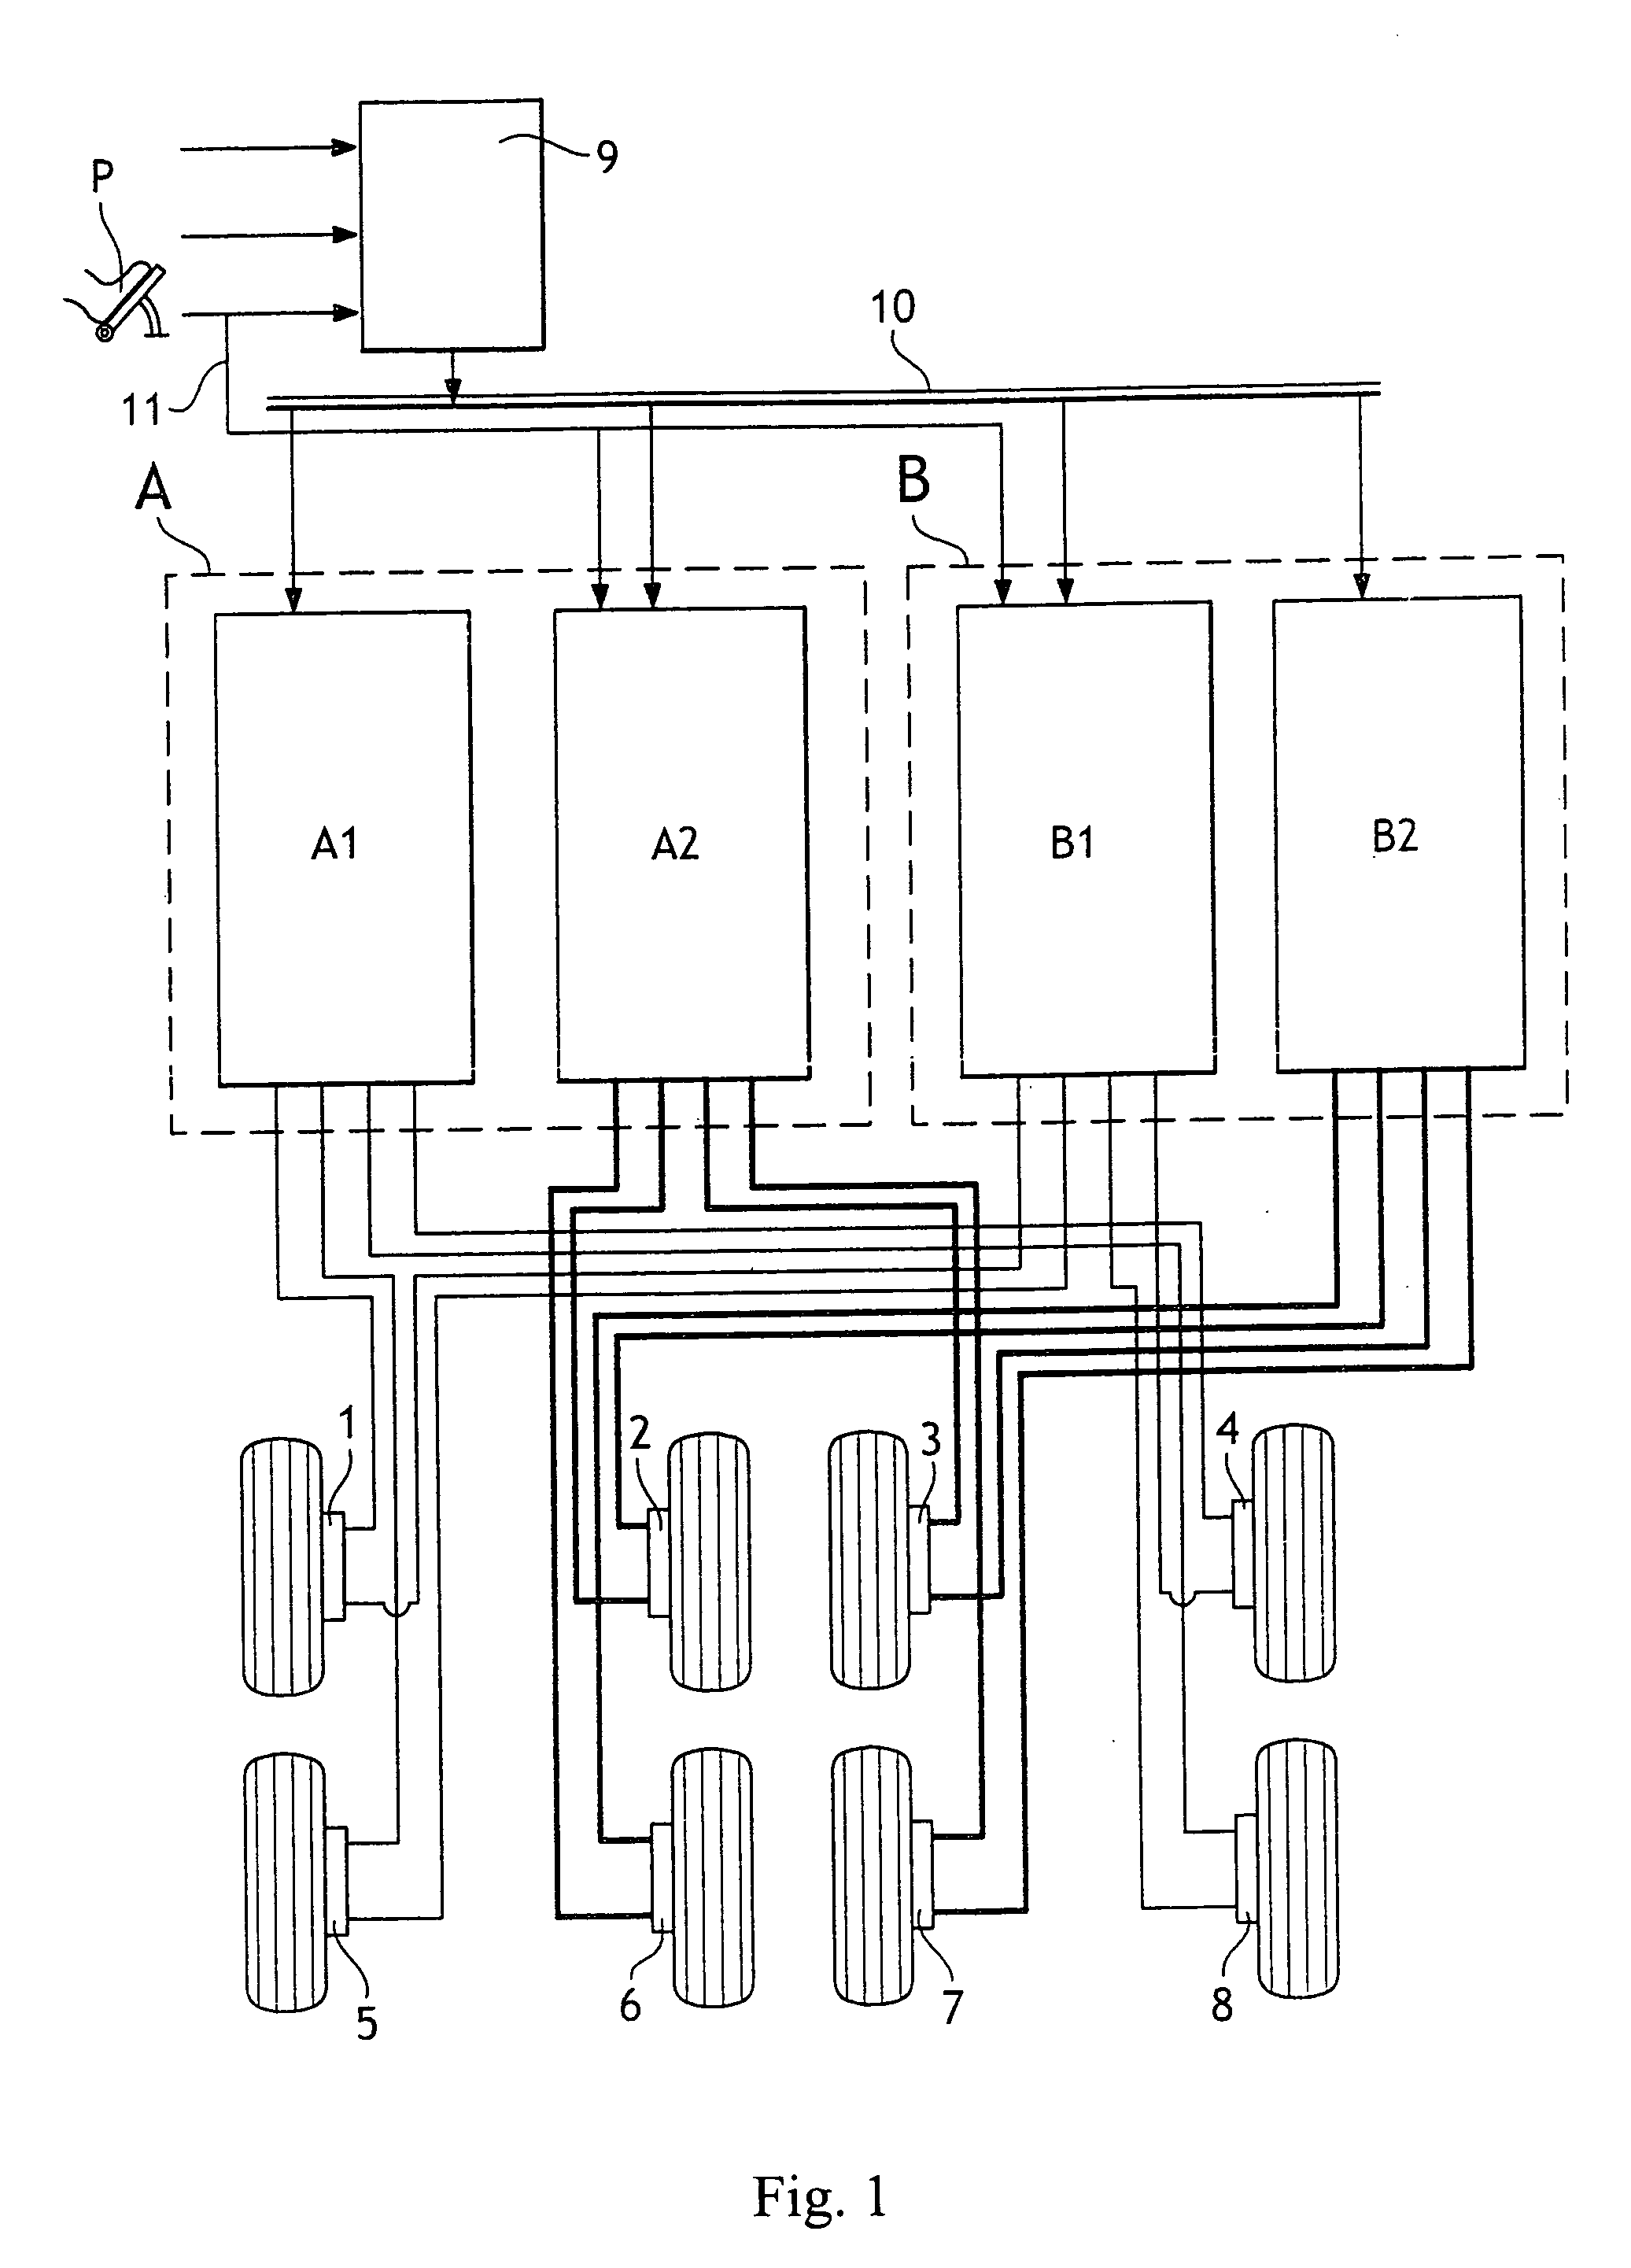 Architecture for an airplane braking system including two computers and capable of withstanding two breakdowns, and a method of managing such an architecture